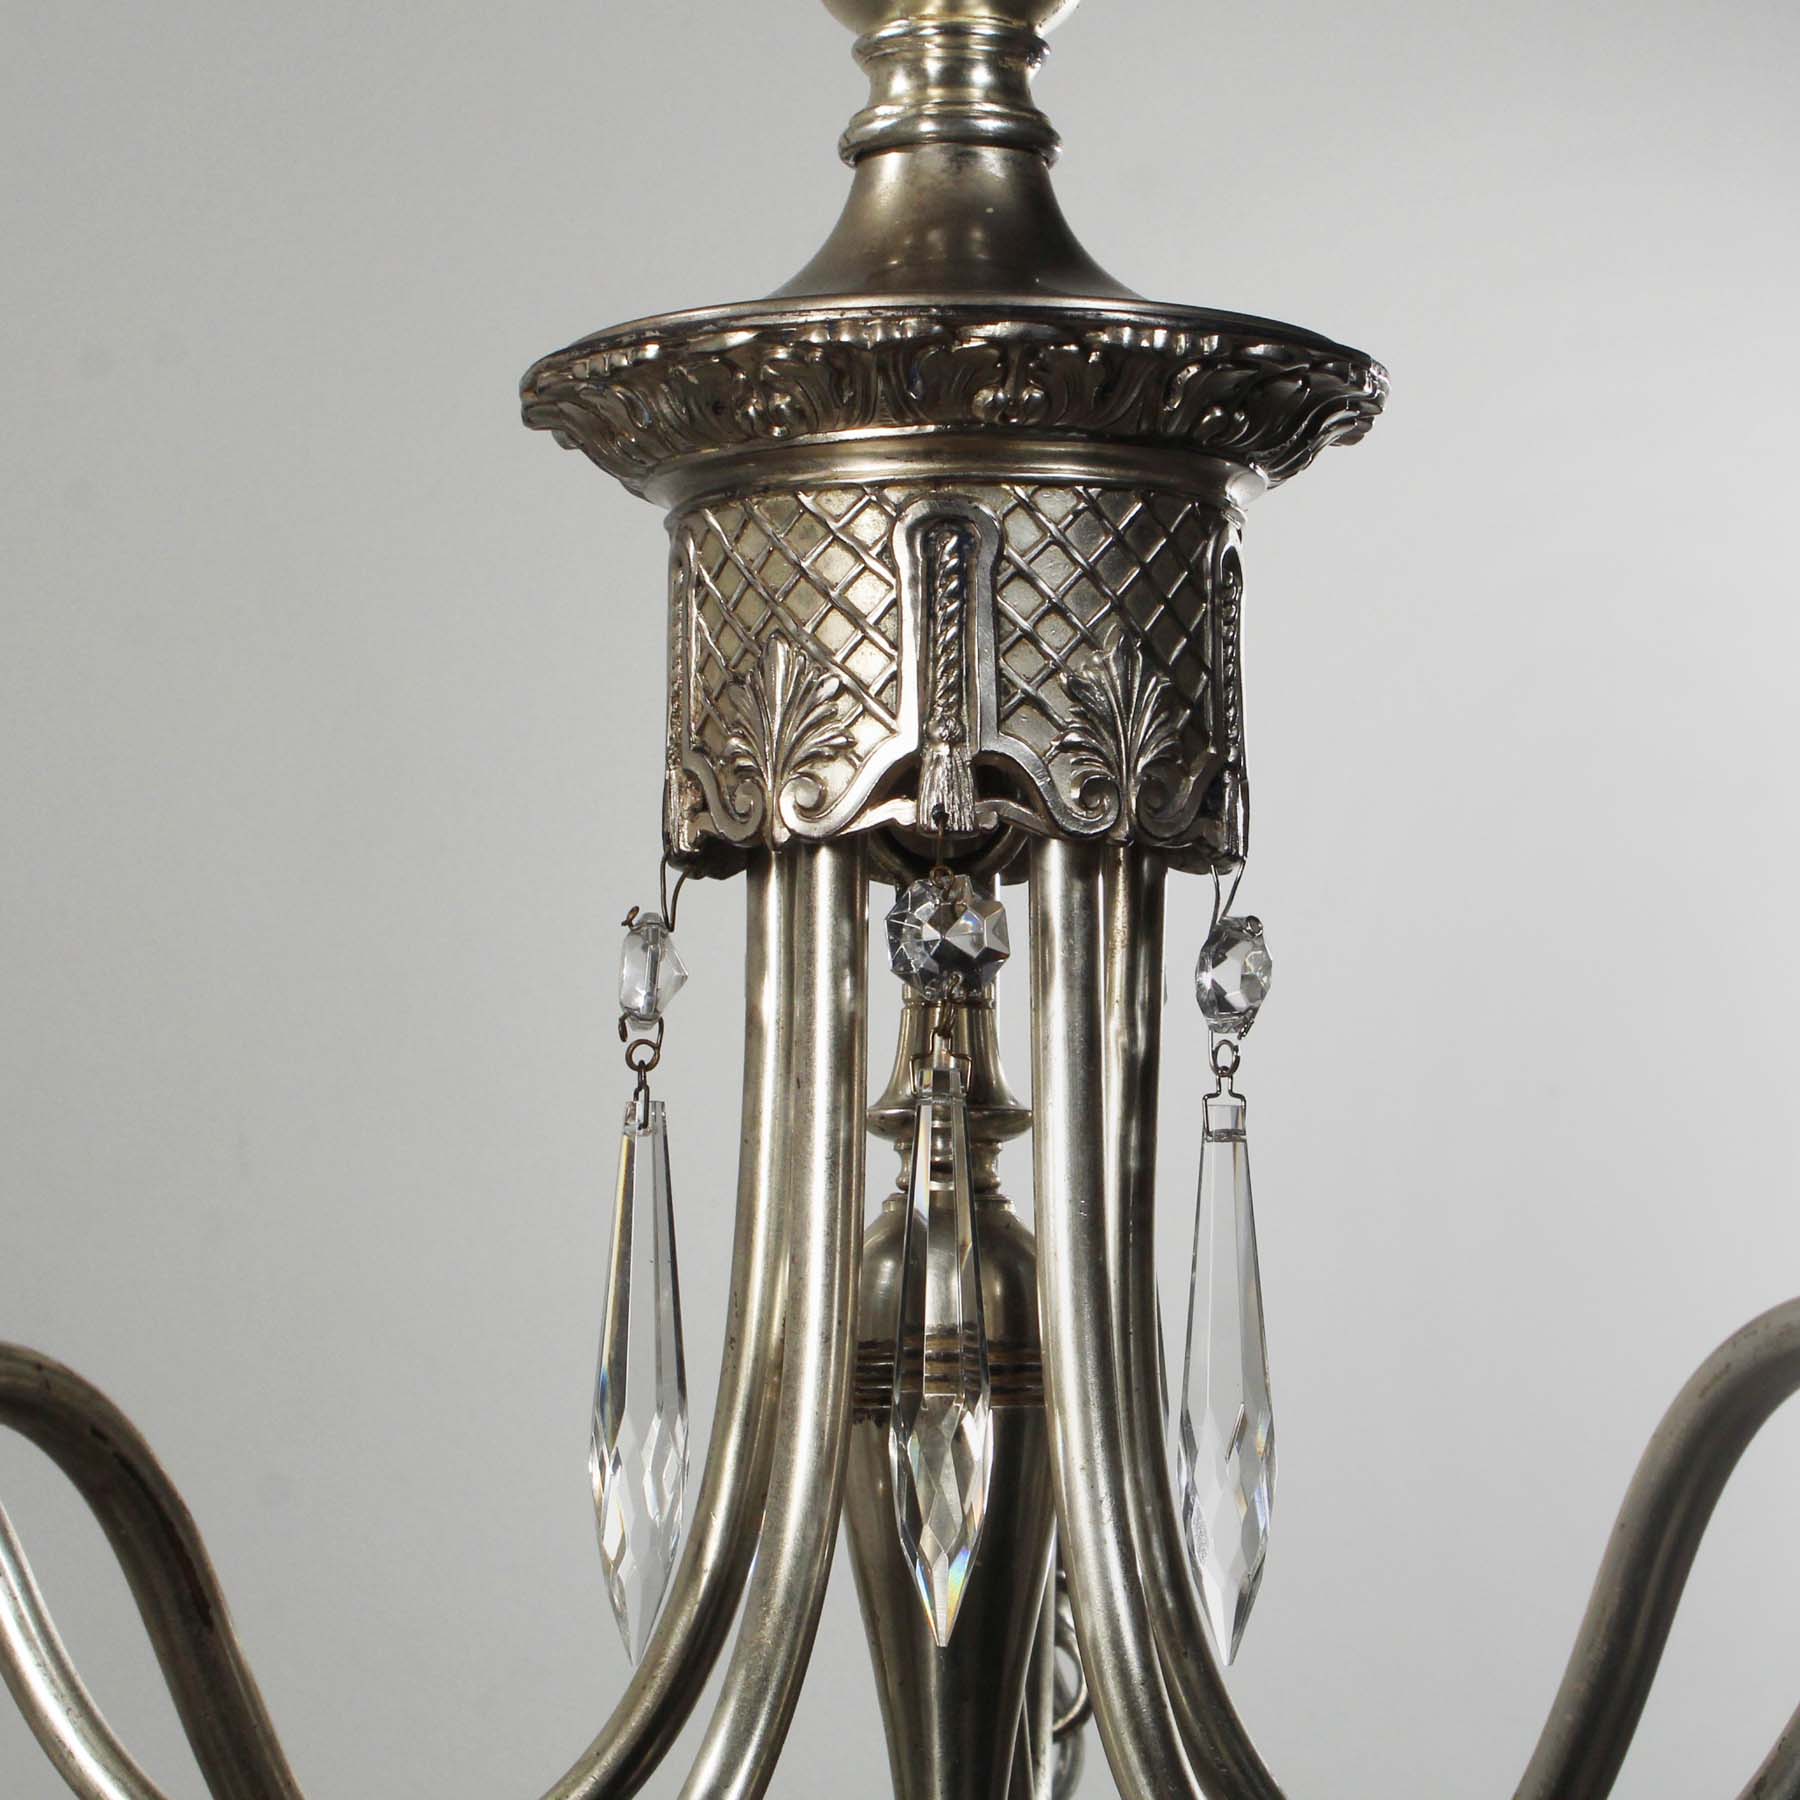 SOLD Antique Neoclassical Silver Plate Chandelier with Prisms, Star Chandelier Co. -69067